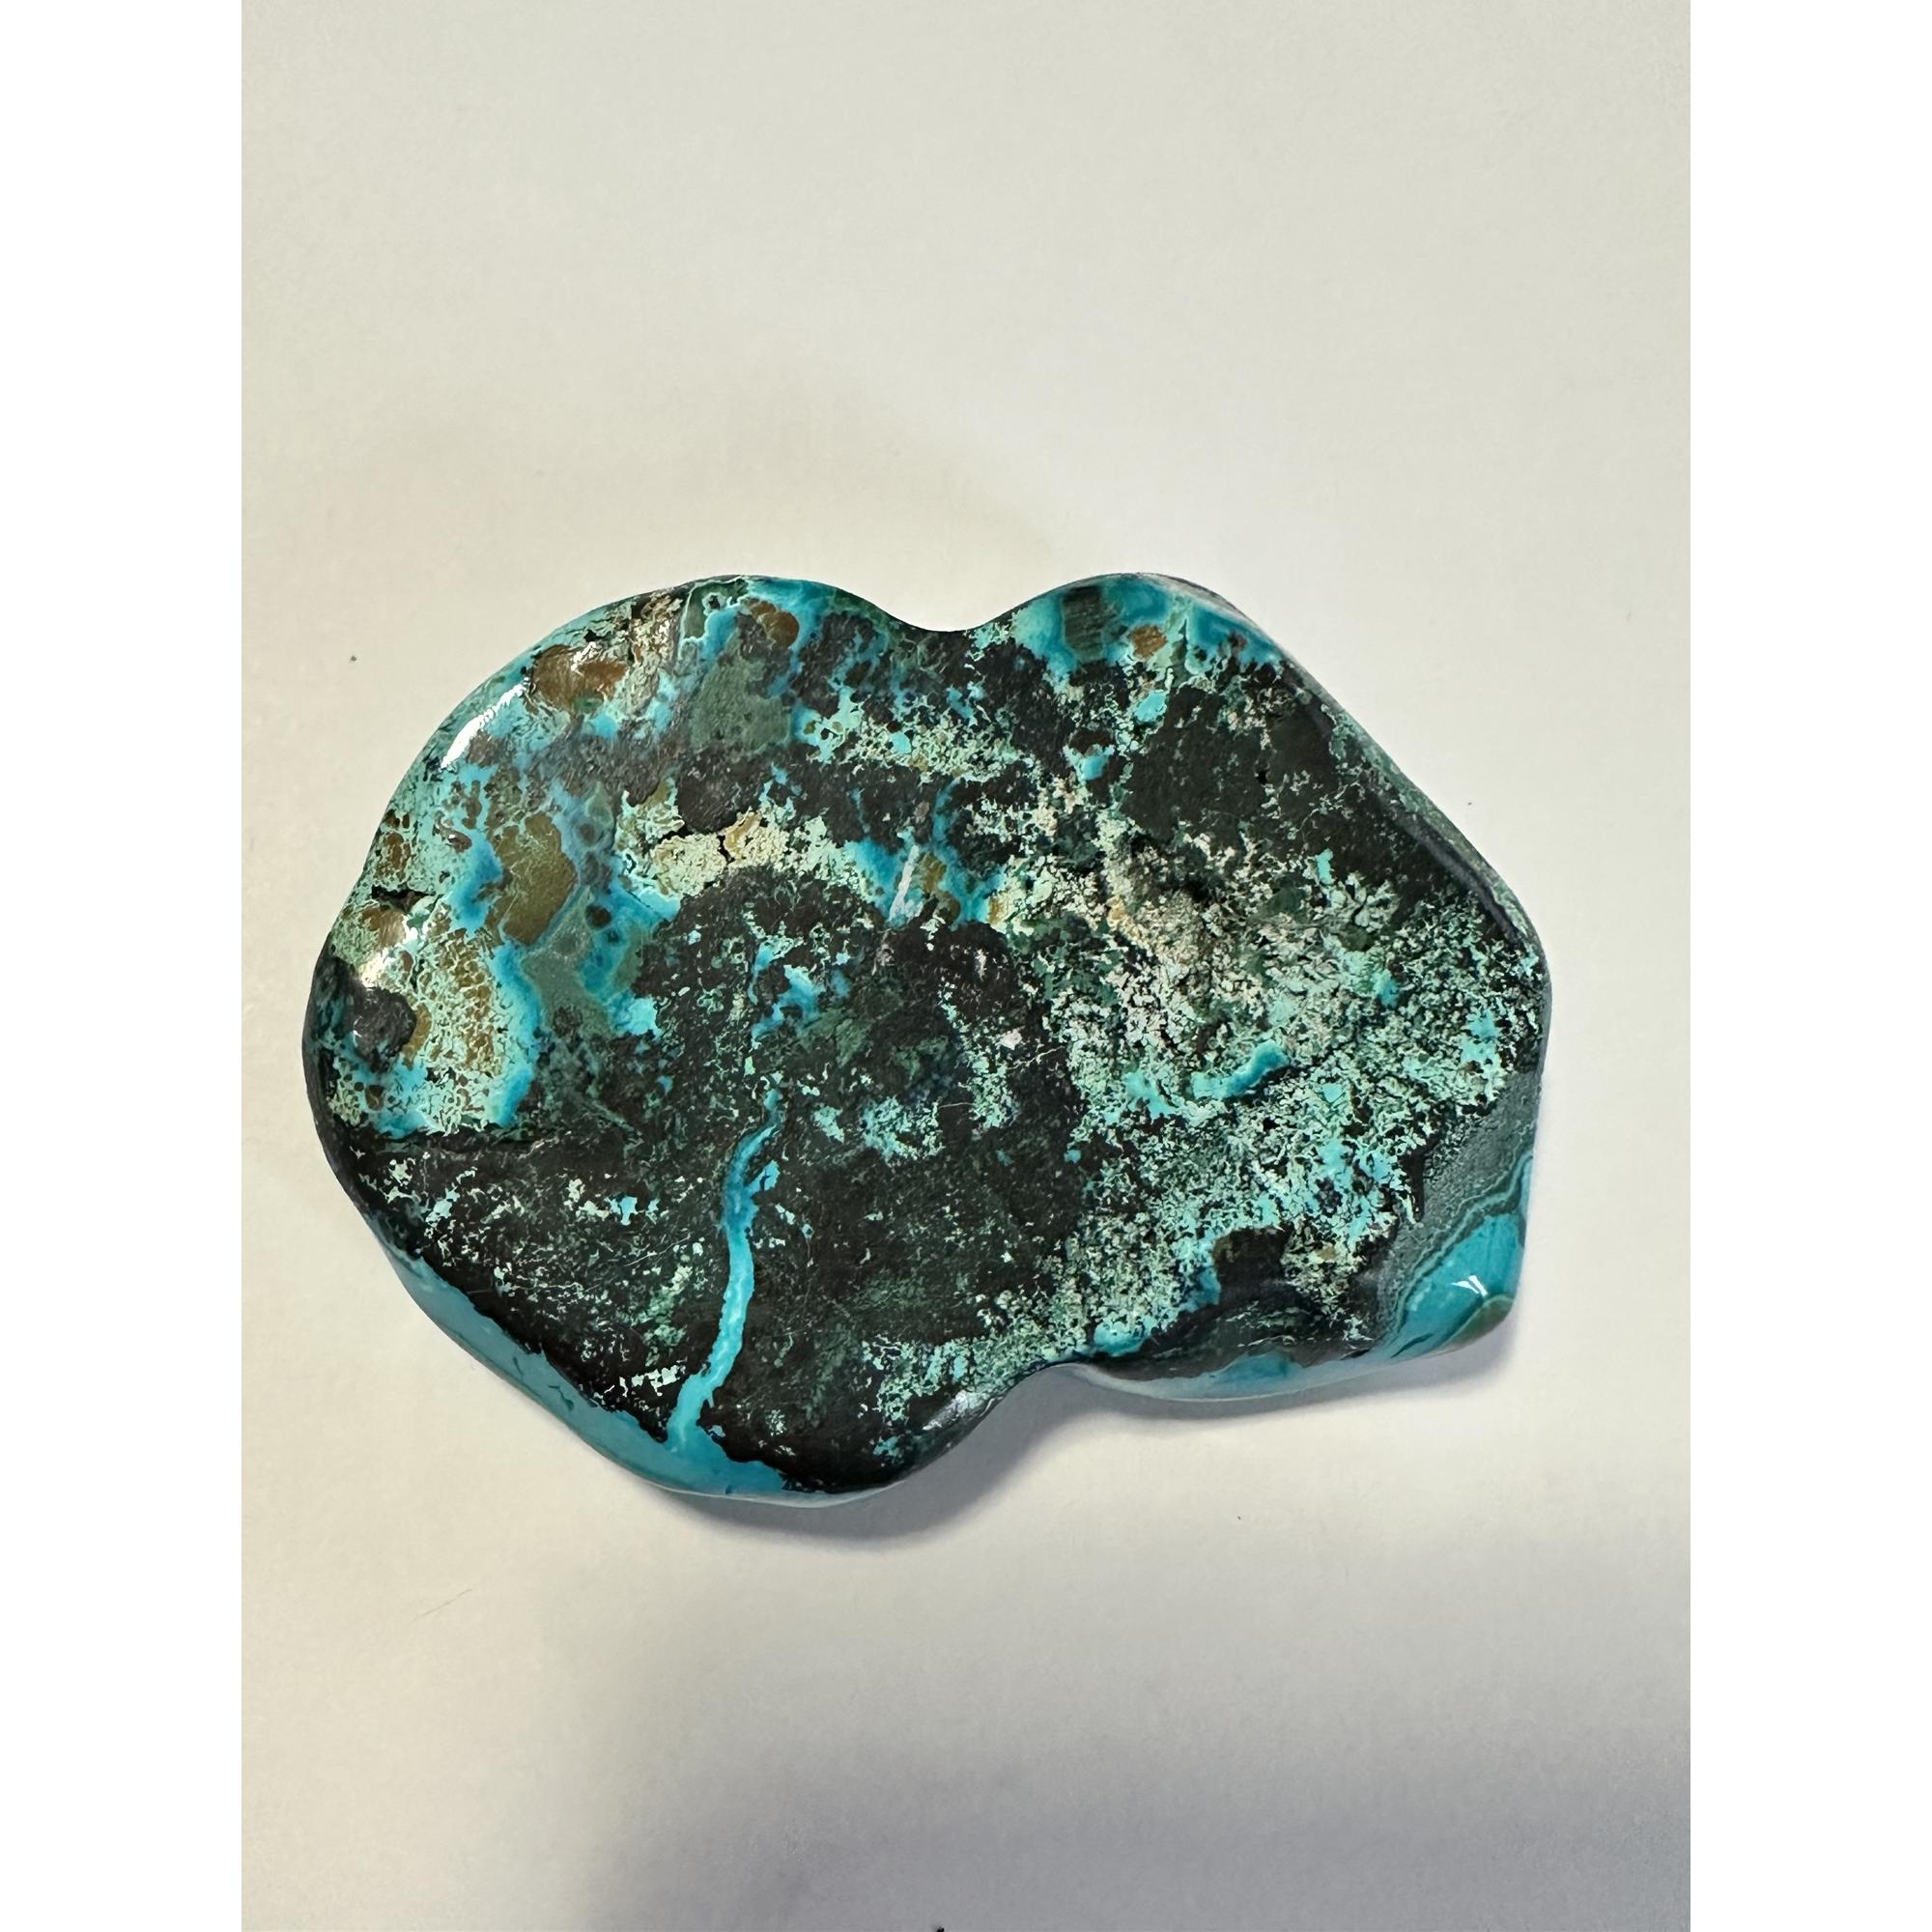 Chrysocolla with Malachite, AA grade vivid blue color, WOW Prehistoric Online